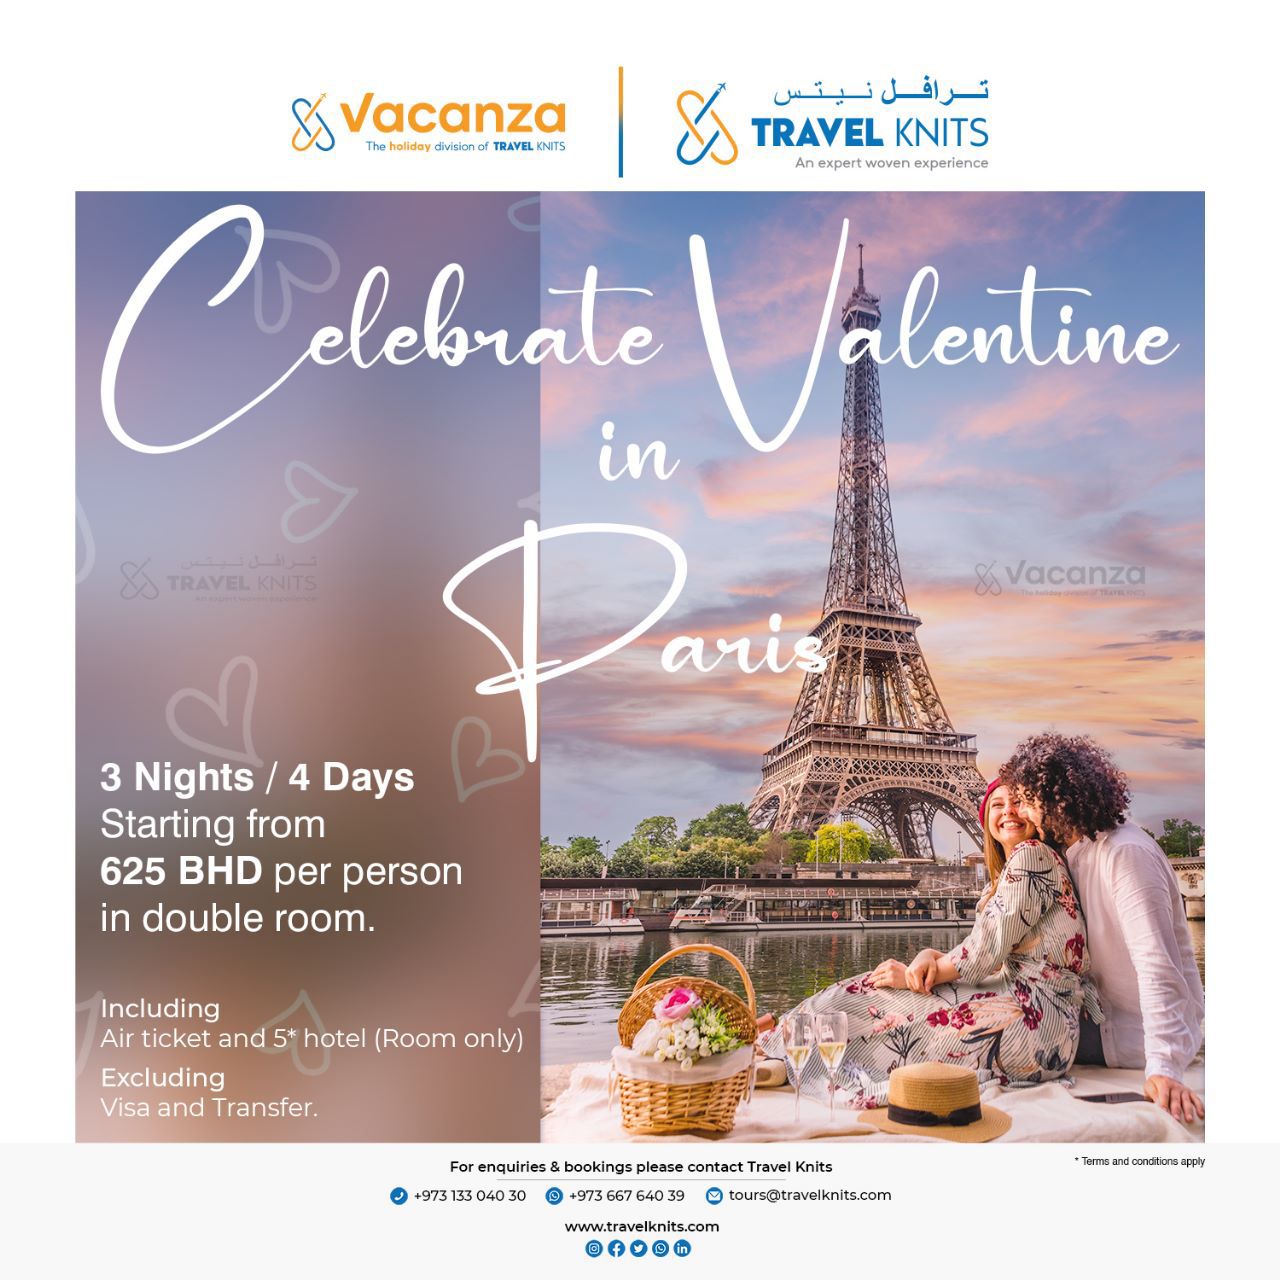 Celebrate Valantine in Paris|FranceTour Packages - Book honeymoon ,family,adventure tour packages to France|Travel Knits												